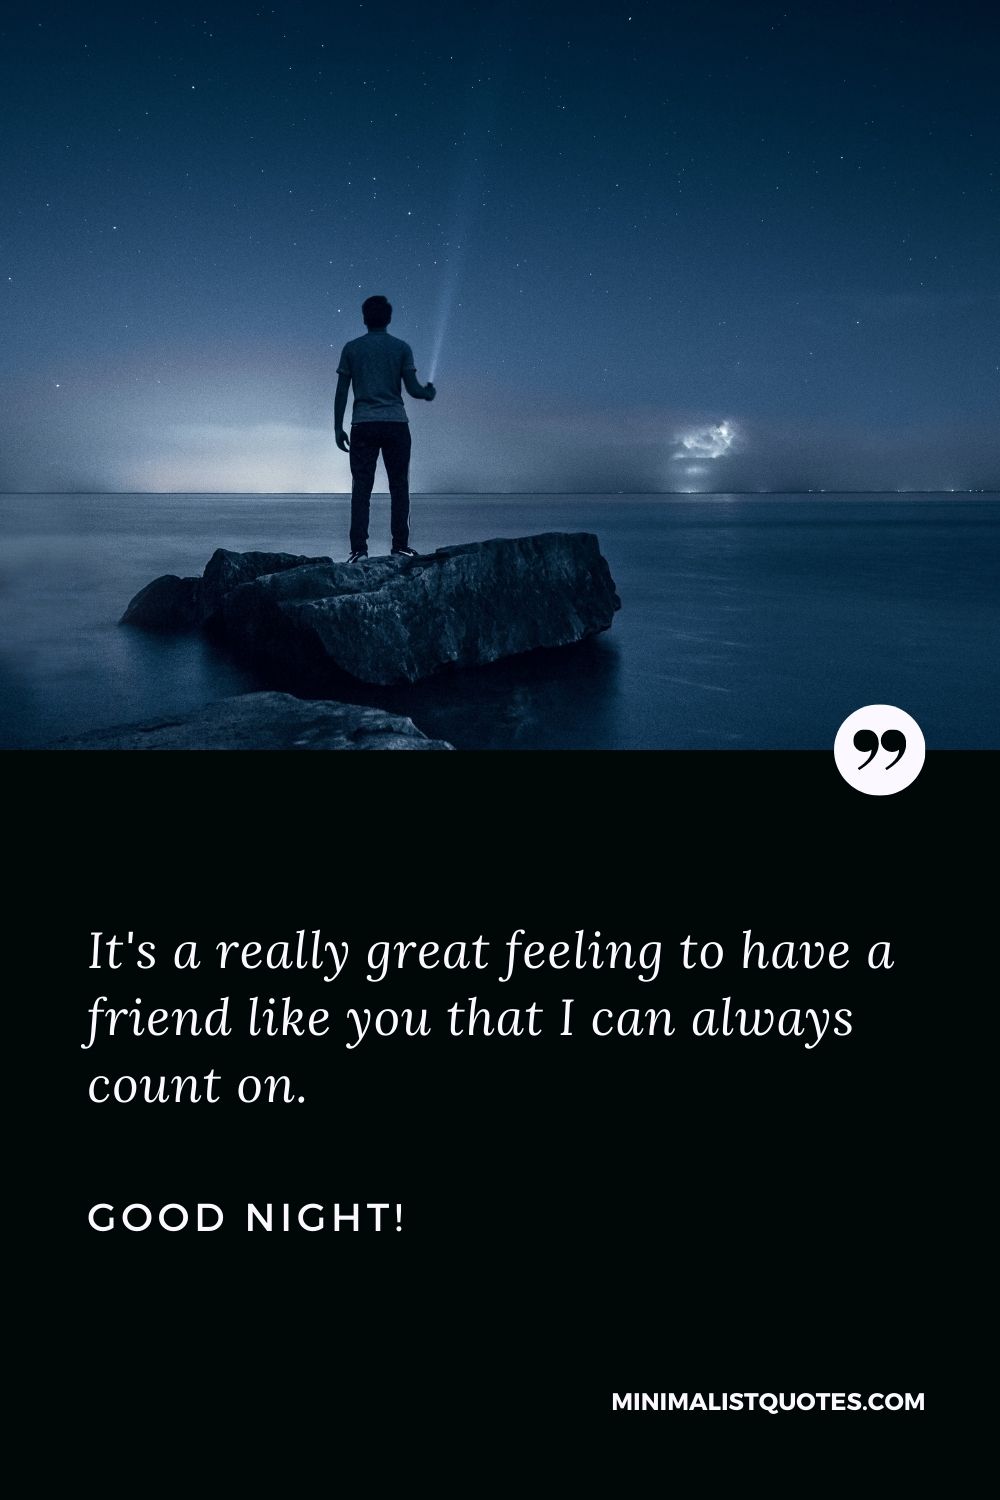 Good night message to a friend: It's a really great feeling to have a friend like you that I can always count on. Good Night!